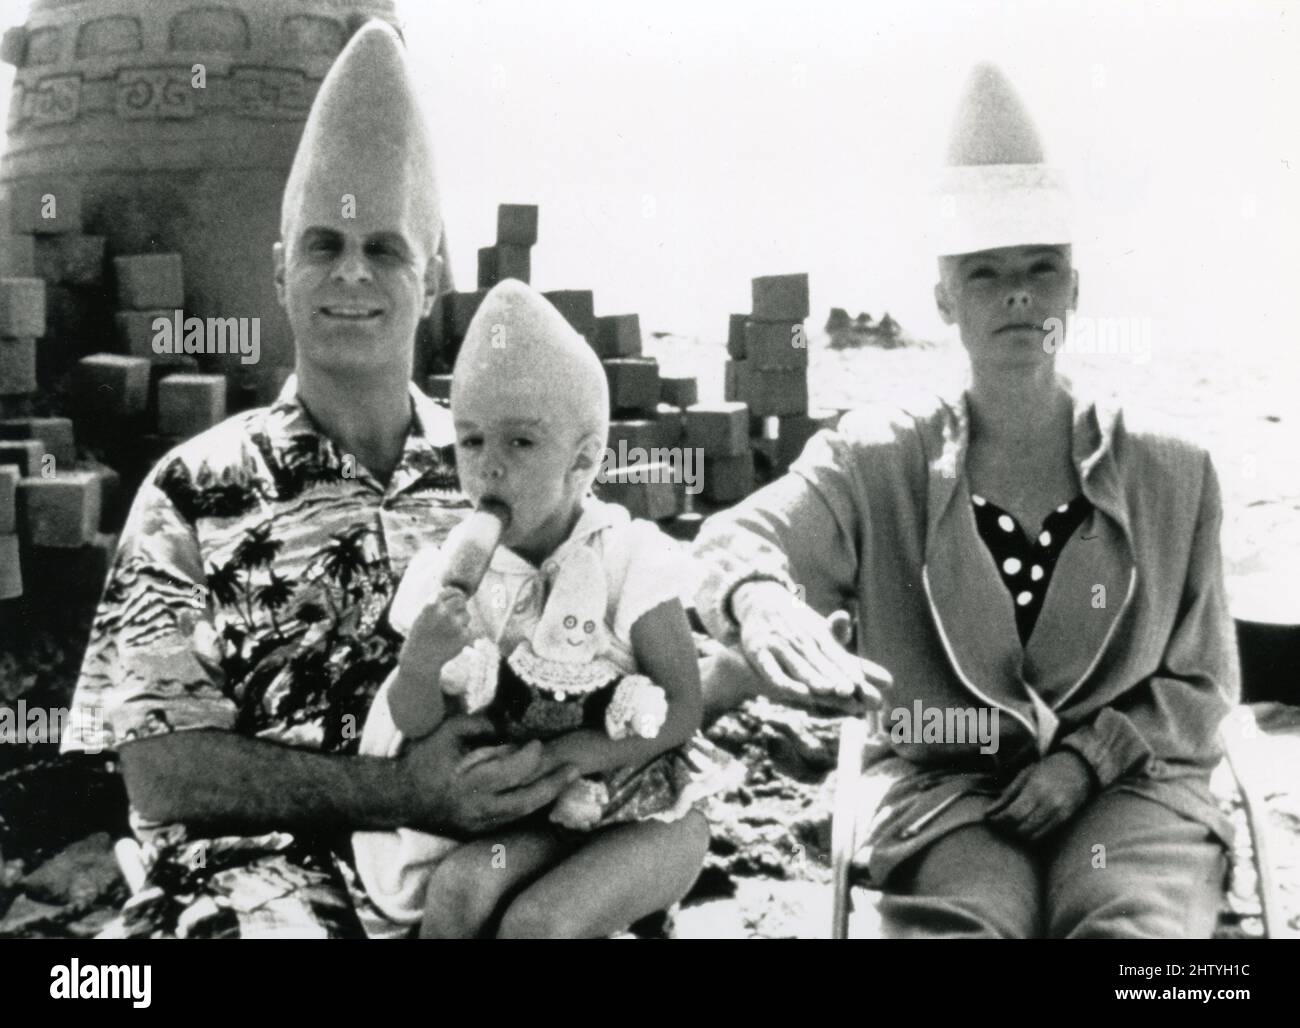 American actor Dan Aykroyd, Jane Curtin, and Michelle Burke in the movie Coneheads, USA 1993 Stock Photo